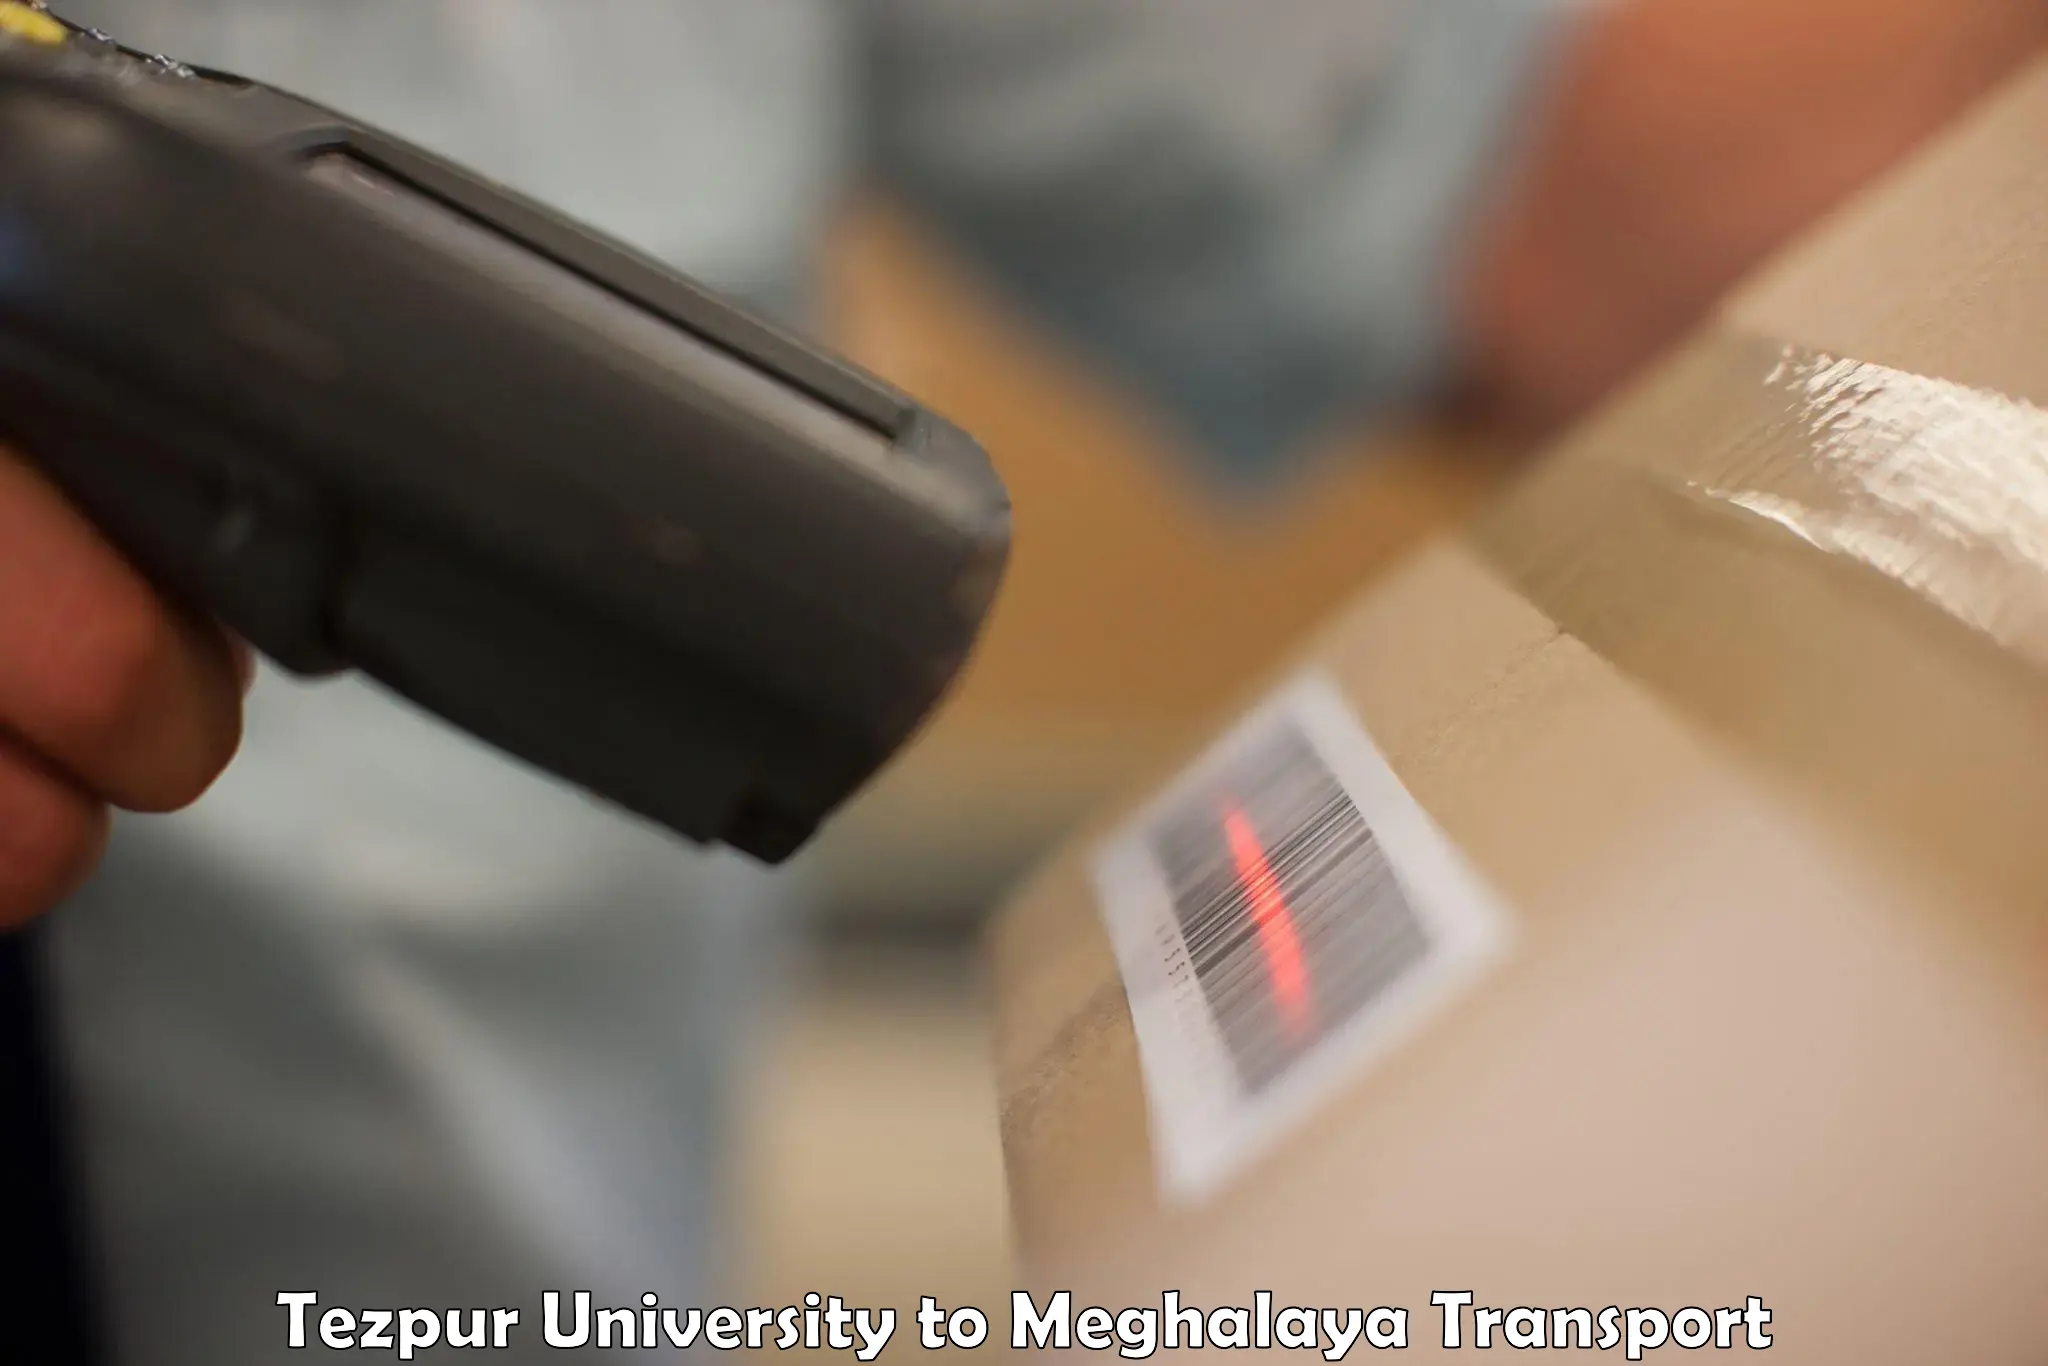 Air freight transport services Tezpur University to Nongpoh